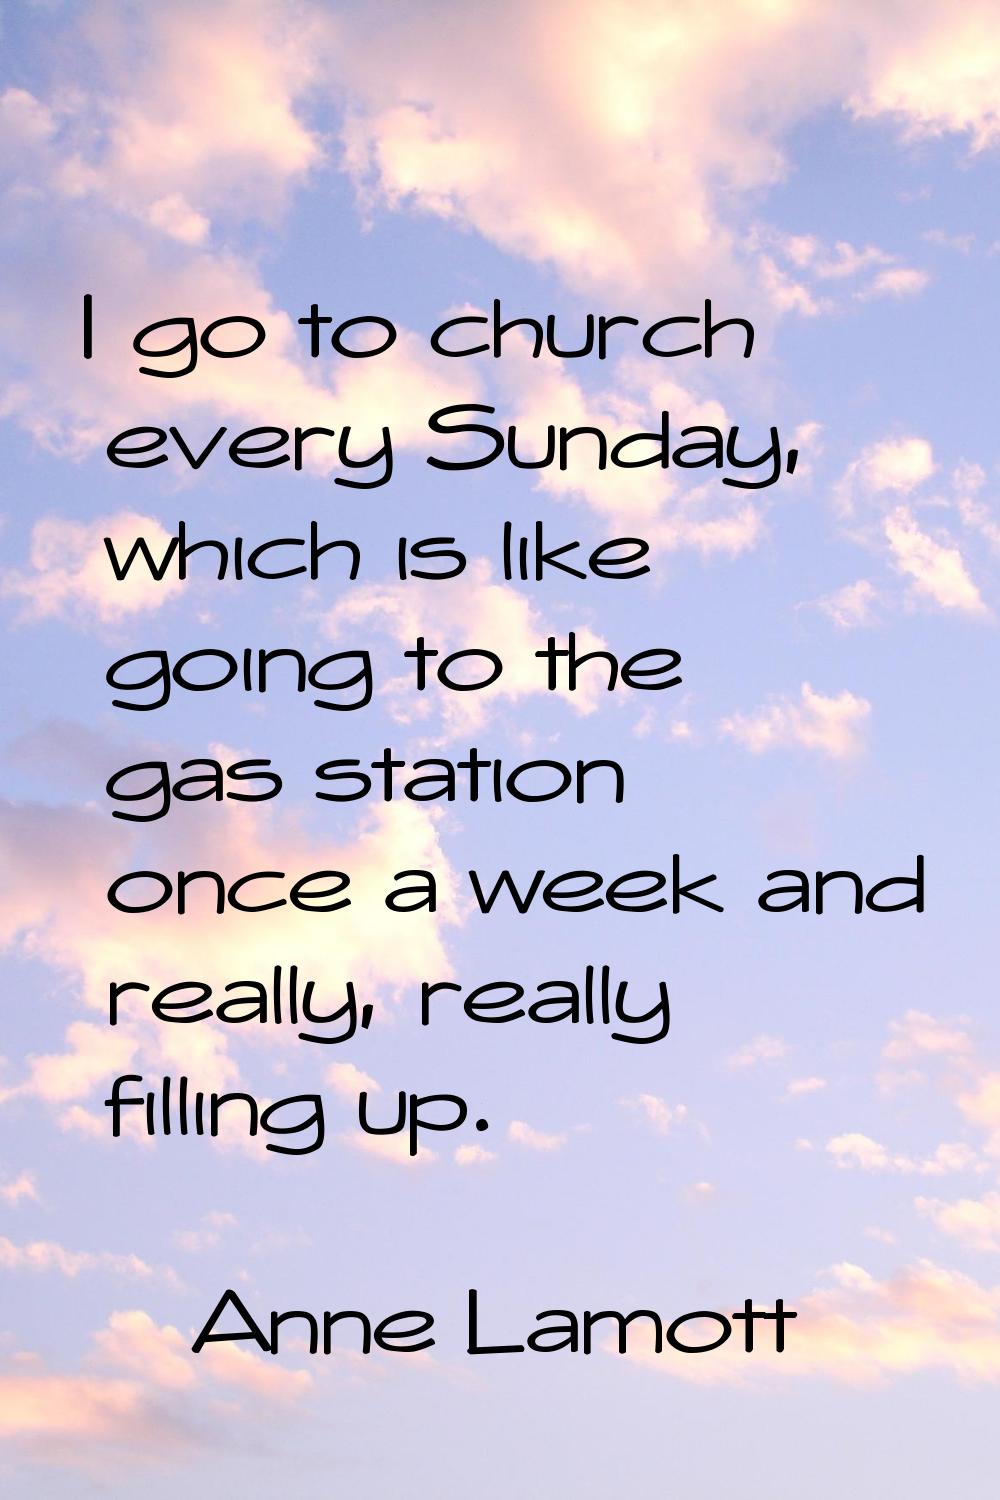 I go to church every Sunday, which is like going to the gas station once a week and really, really 